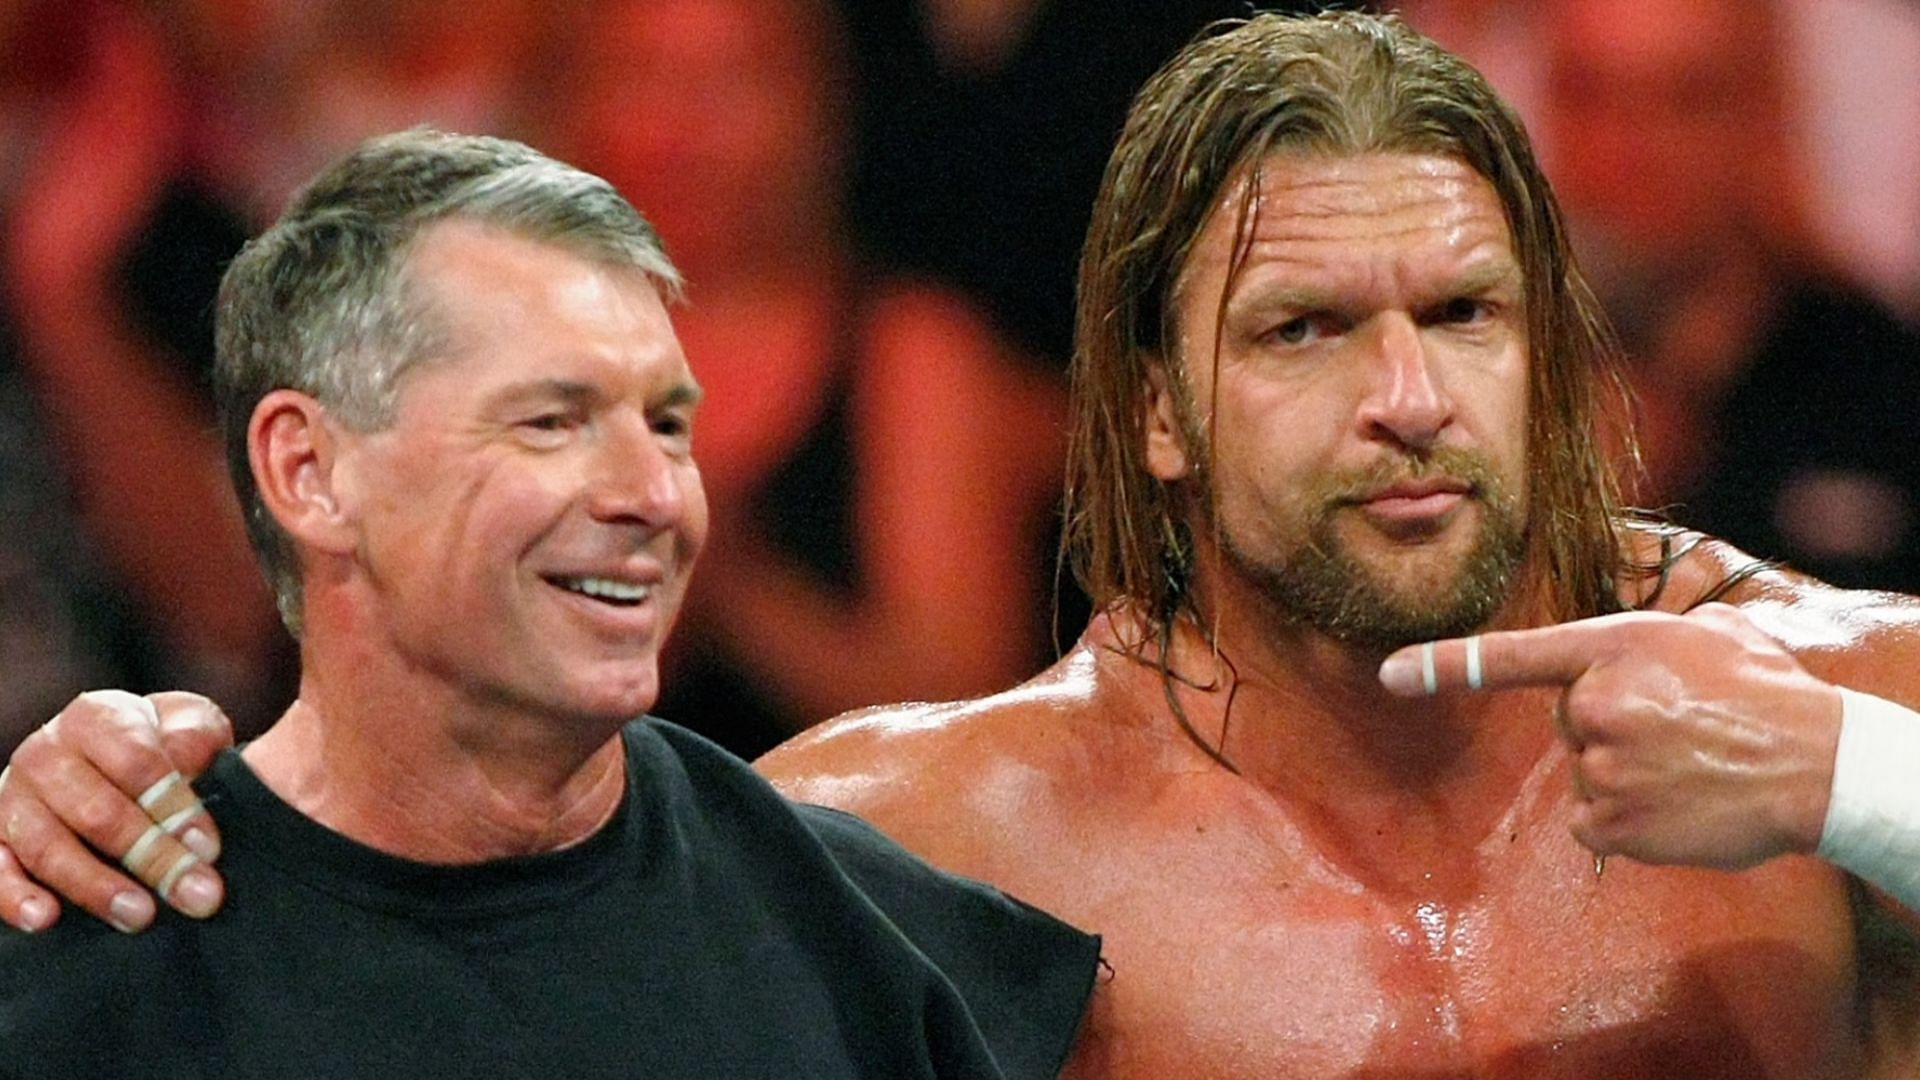 Triple H is the Chief Content Officer of WWE since Vince McMahon